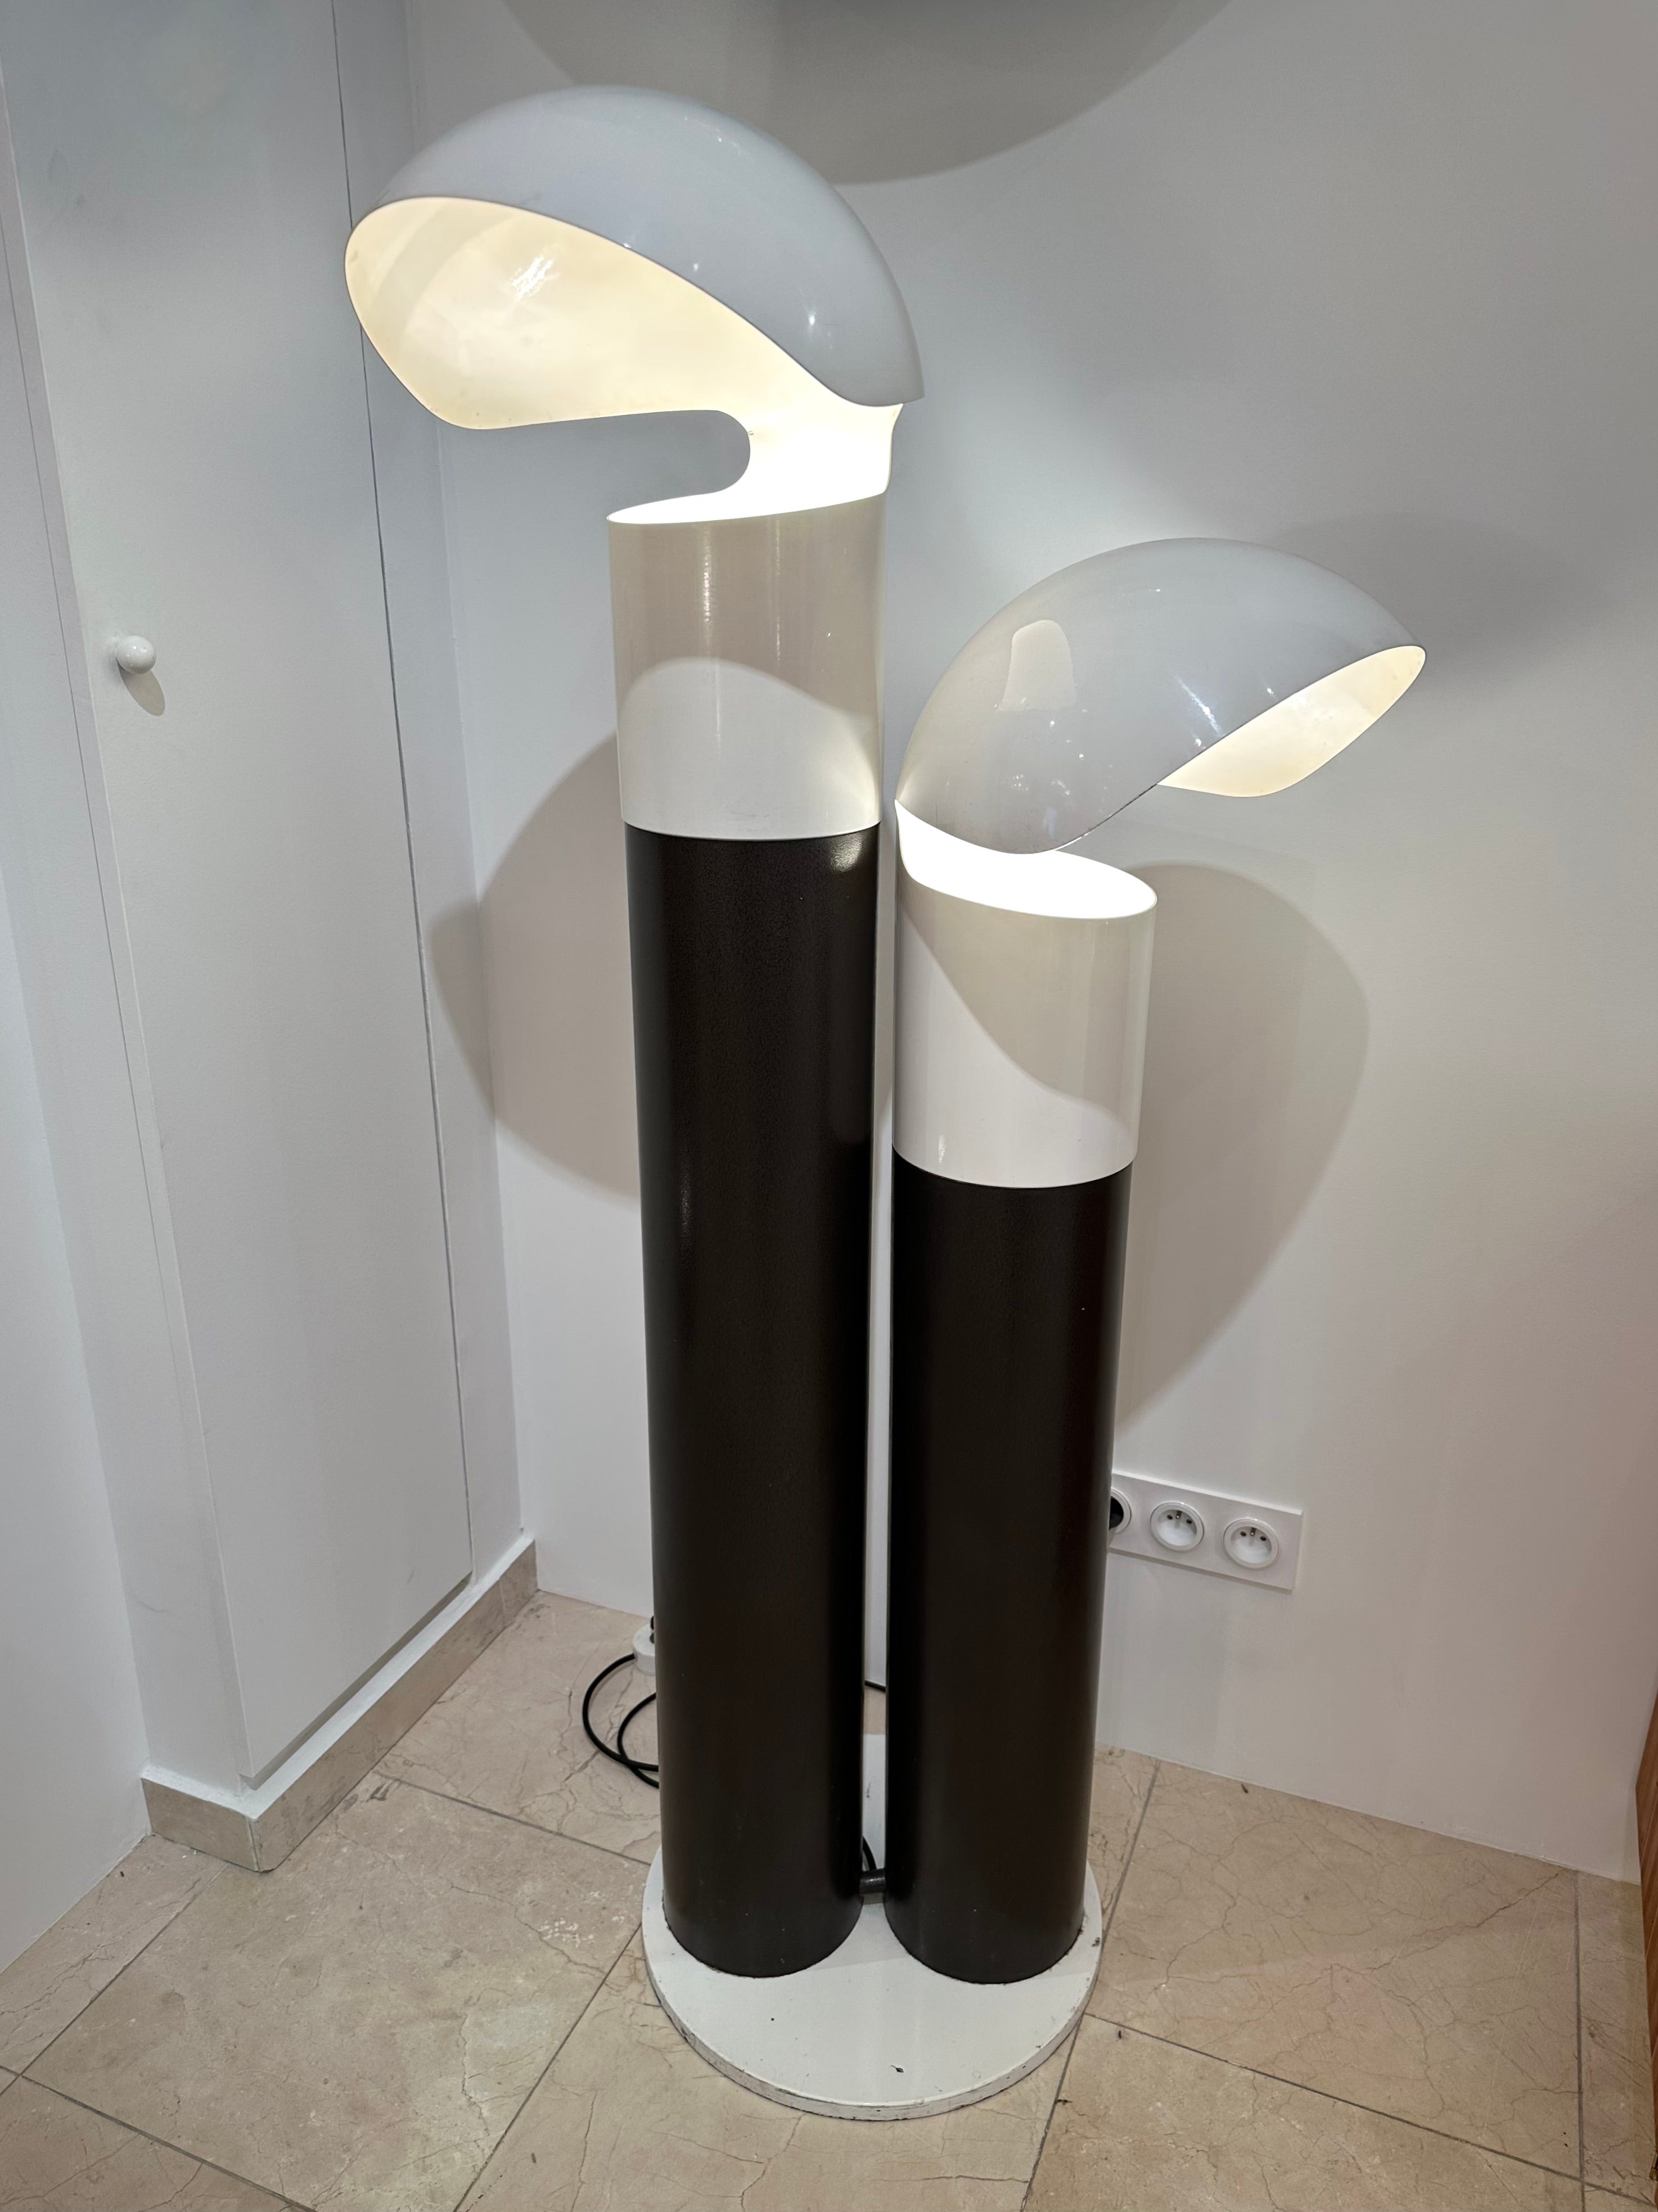 Extremely rare Mid-Century Modern Space Age Floor lamp with double parable difusor shades white lacquered metal by the italian designer Franco Buzzi Ceriani. Famous design like Esperia, Angelo Brotto, Stilnovo, Arteluce, Arredoluce, Artemide, Pierre